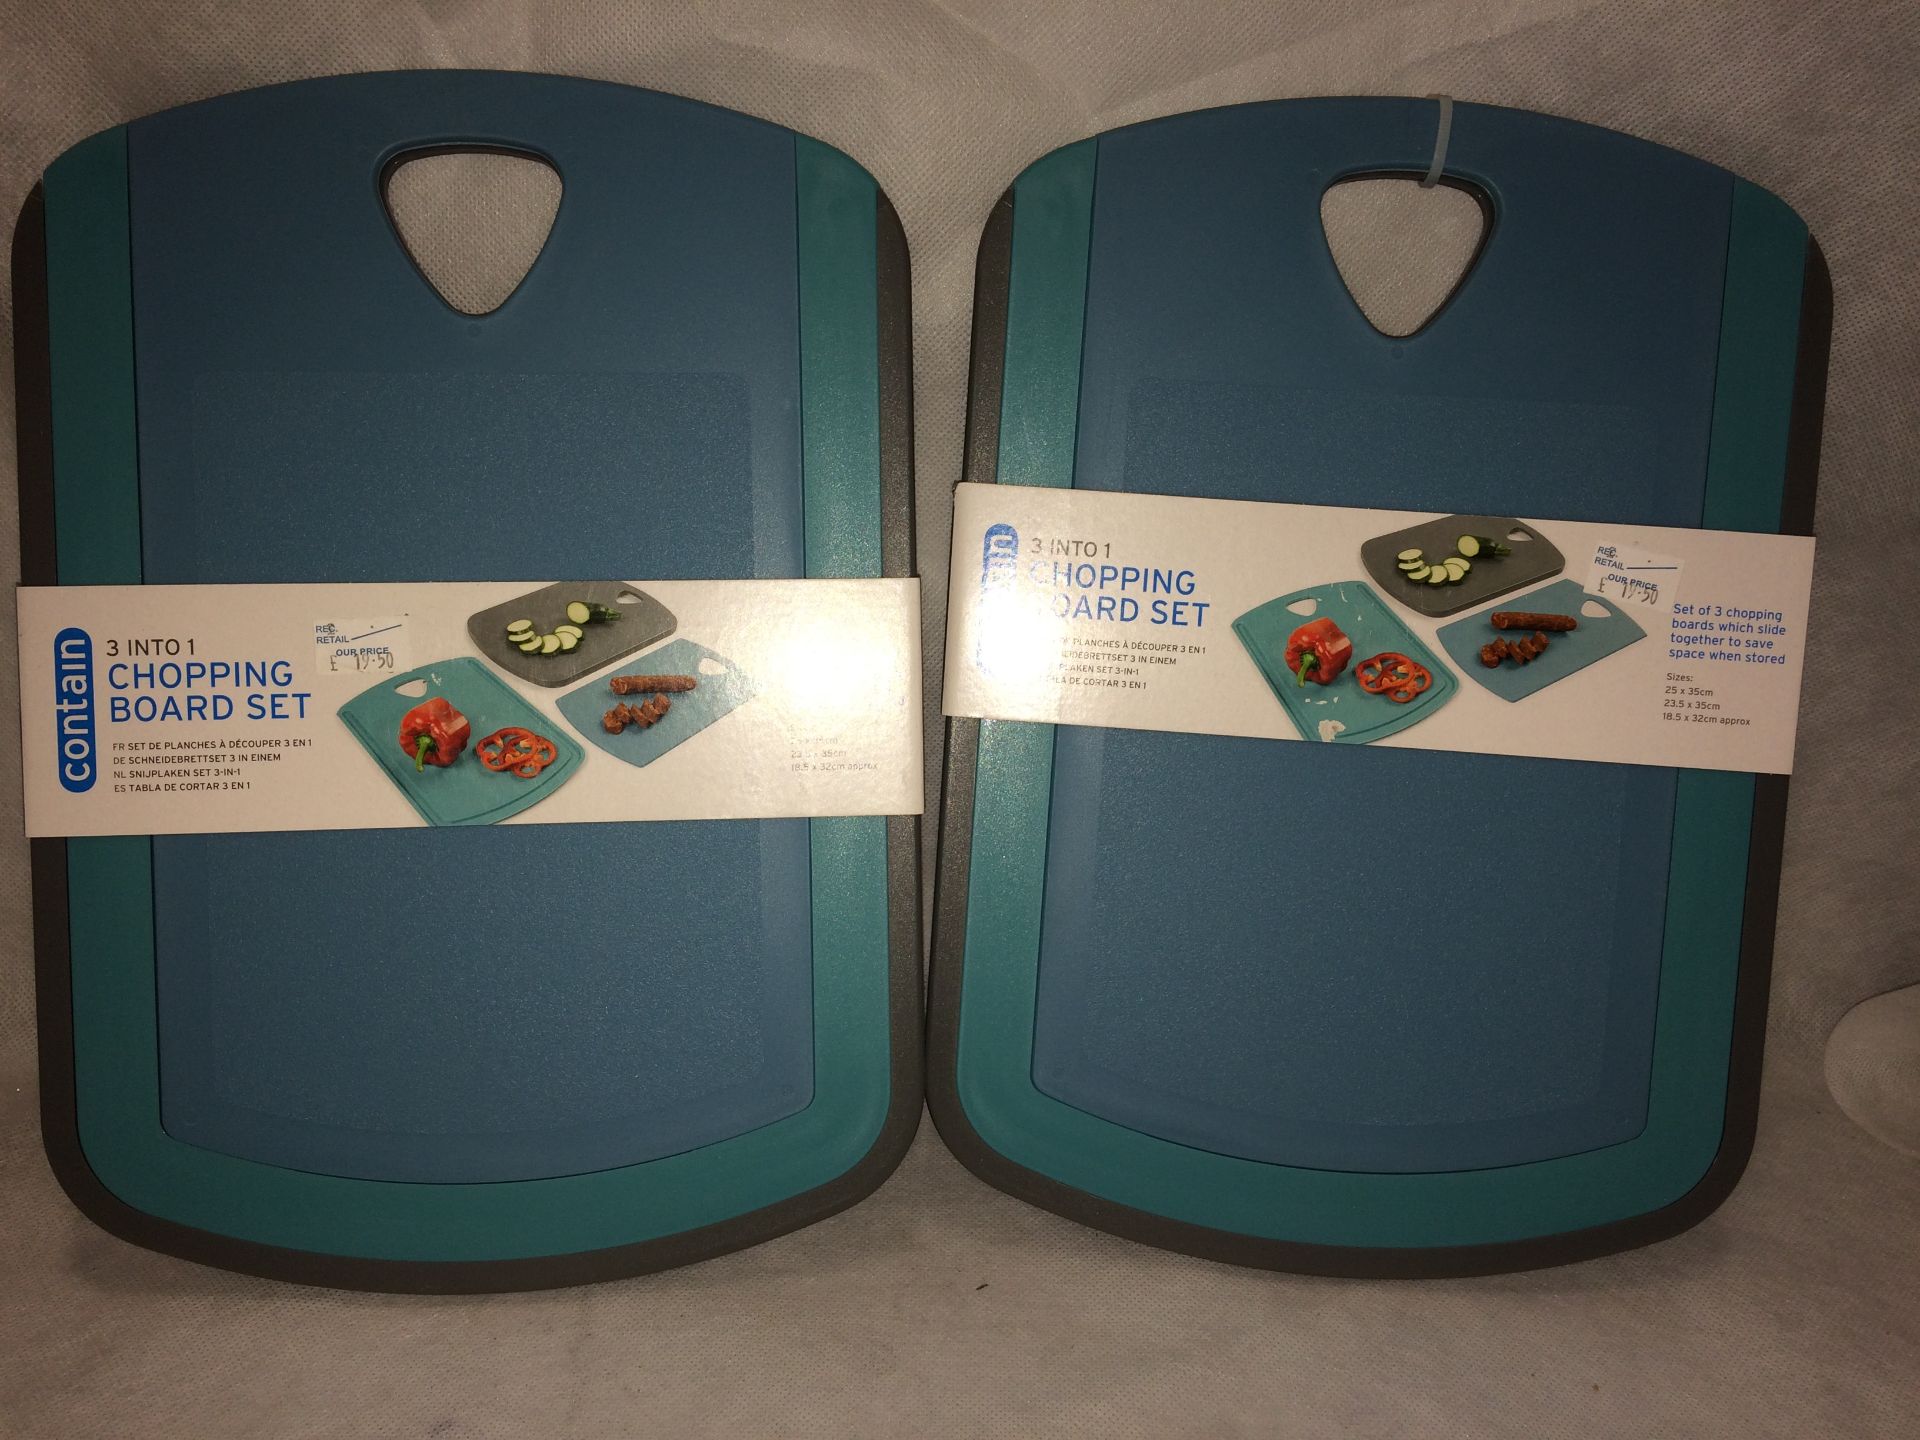 2 x Contain 3-in-1 chopping board sets R